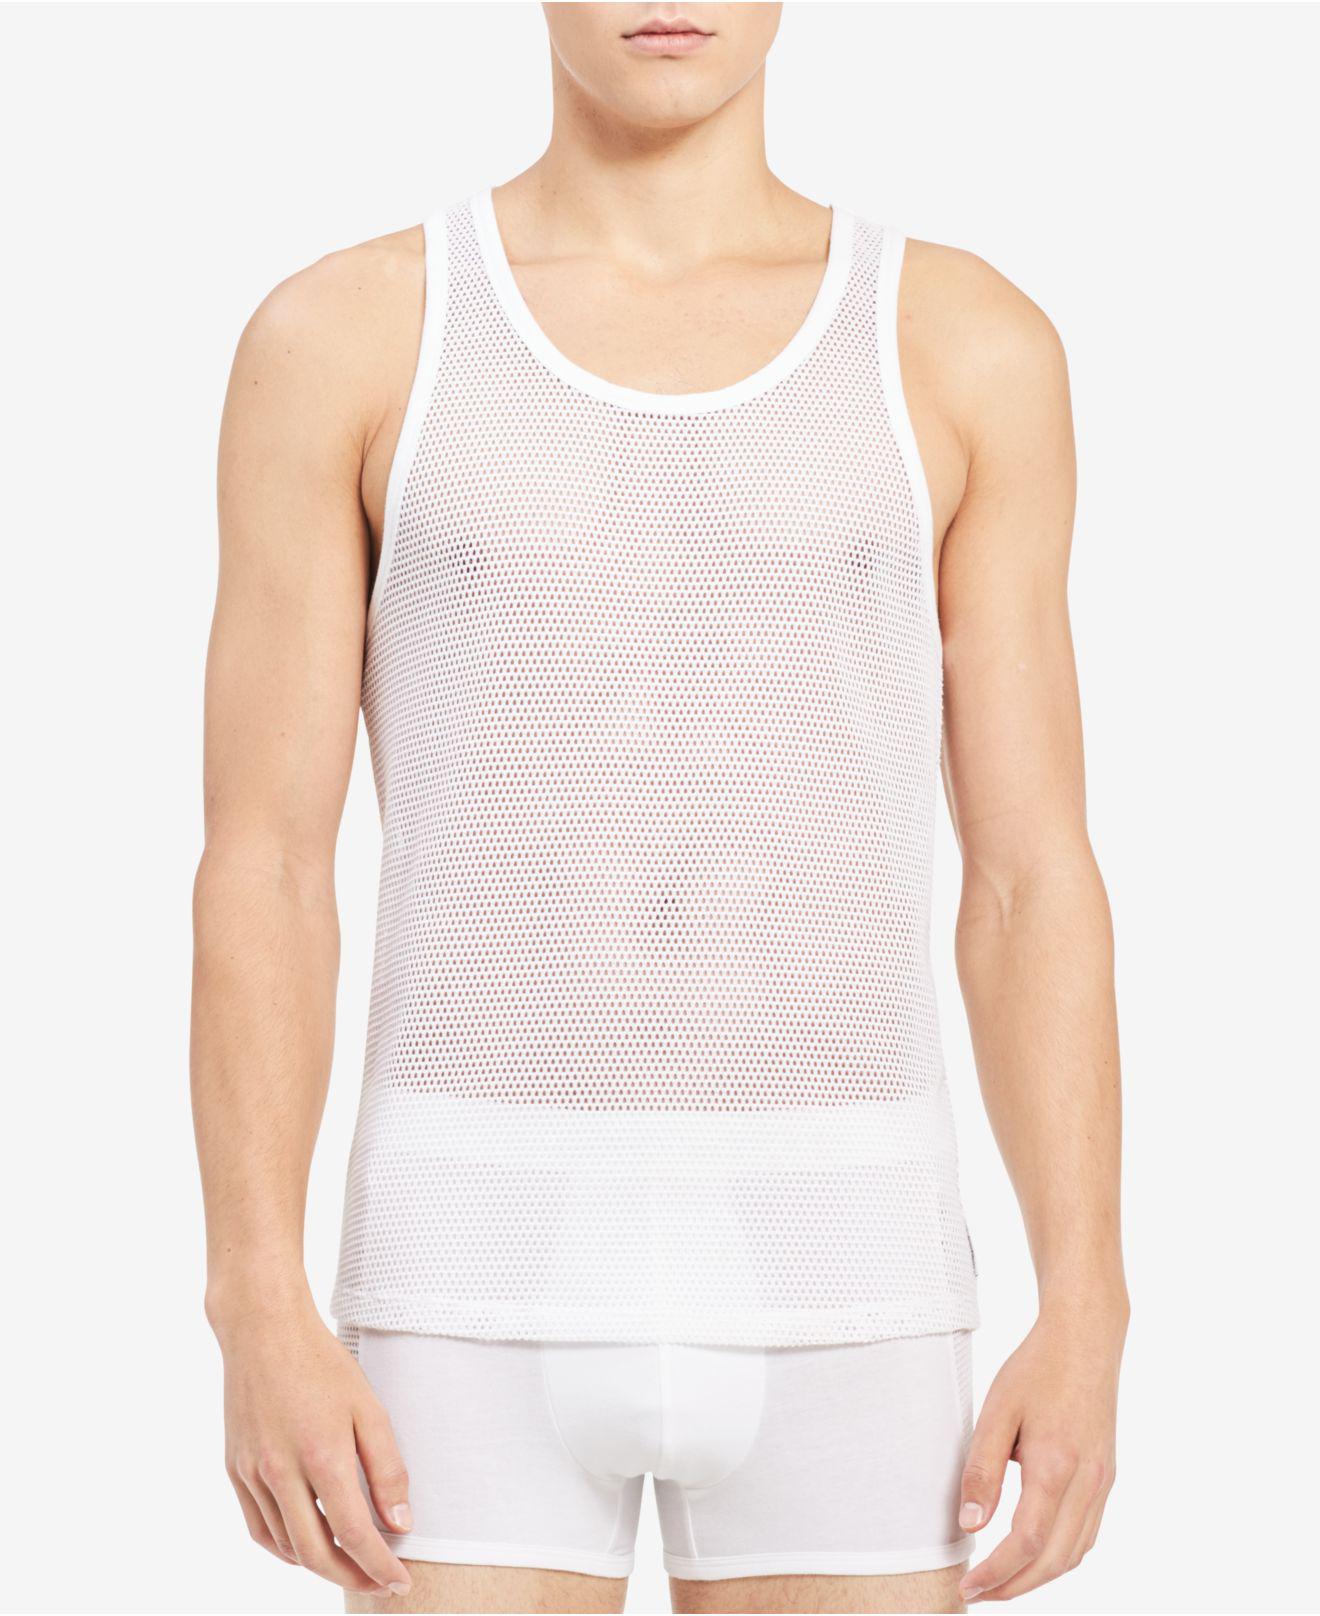 Calvin Klein Synthetic Mesh Tank Top in White for Men - Lyst